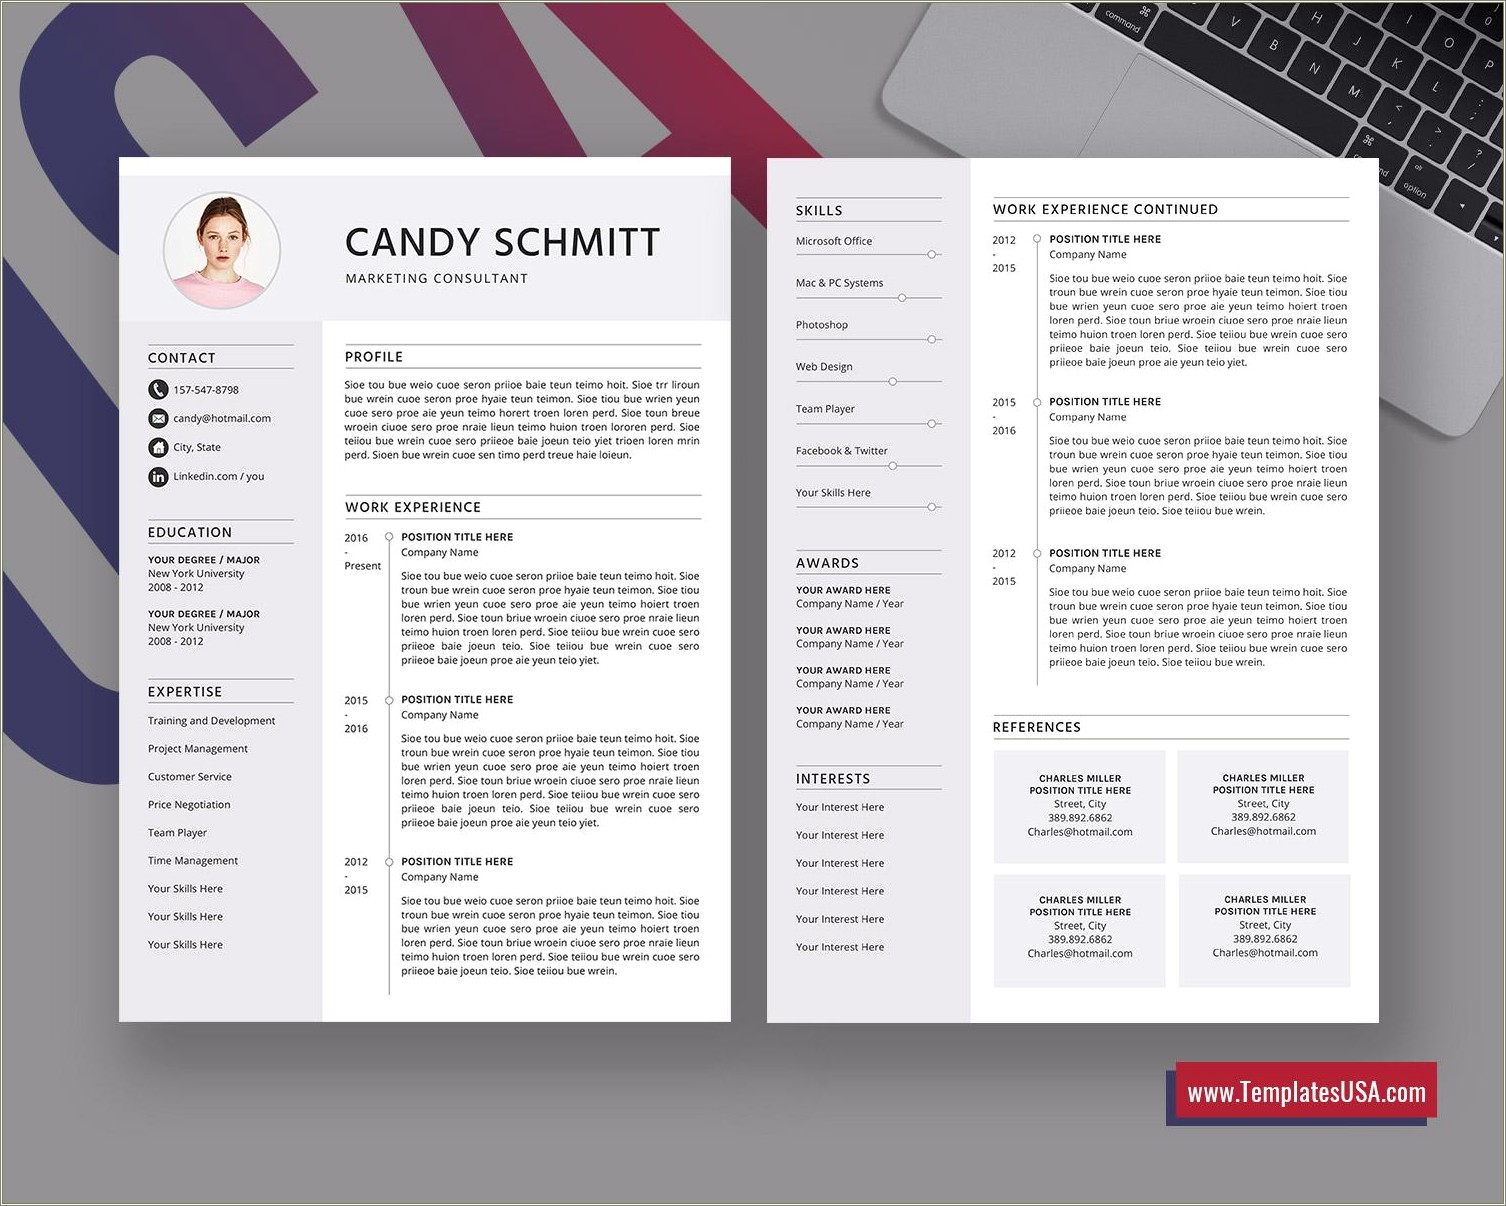 Are One Page Resumes Still Best